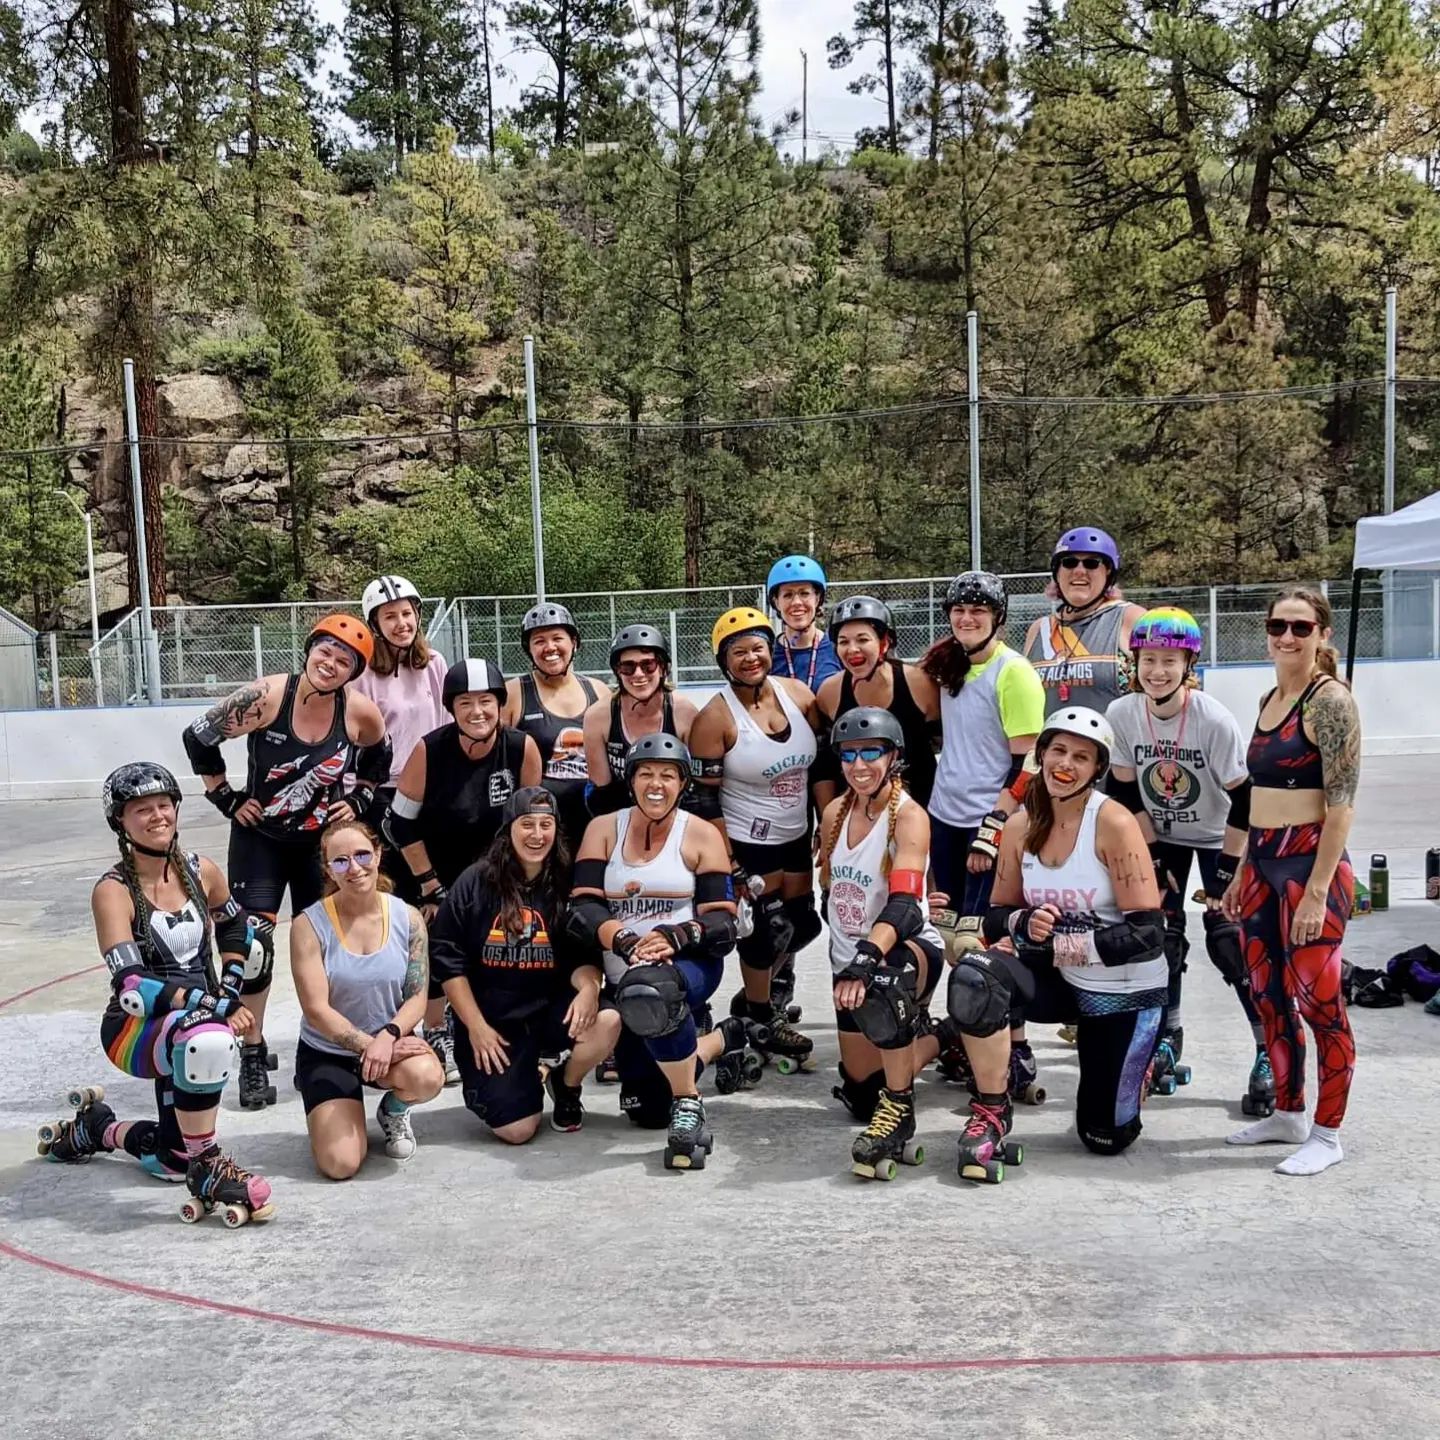 Even though we got rained out (and powered out) on Saturday, we were lucky enough that some visiting @crossroadscityderby skaters were still with us the following morning to have a quick pick up scrimmage. They are a great bunch and are so SO tough! Thanks for playing with us, besties. ❤️🧡🖤🤍

#rollerderby #rollerderbylove #losalamosderbydames #tacosauce #newmexicorollerderby